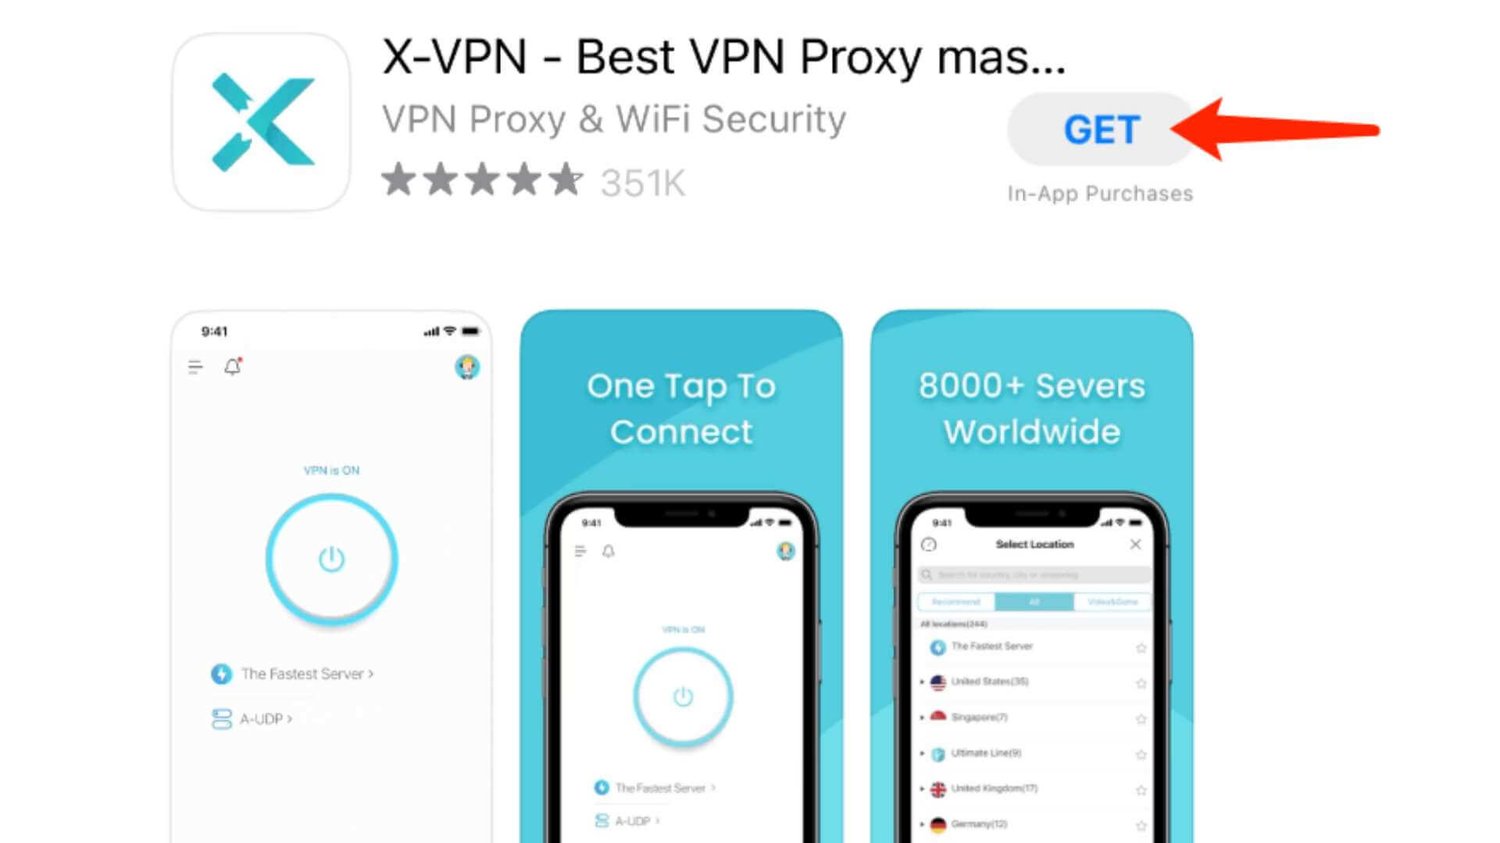 Download X-VPN for free and install it